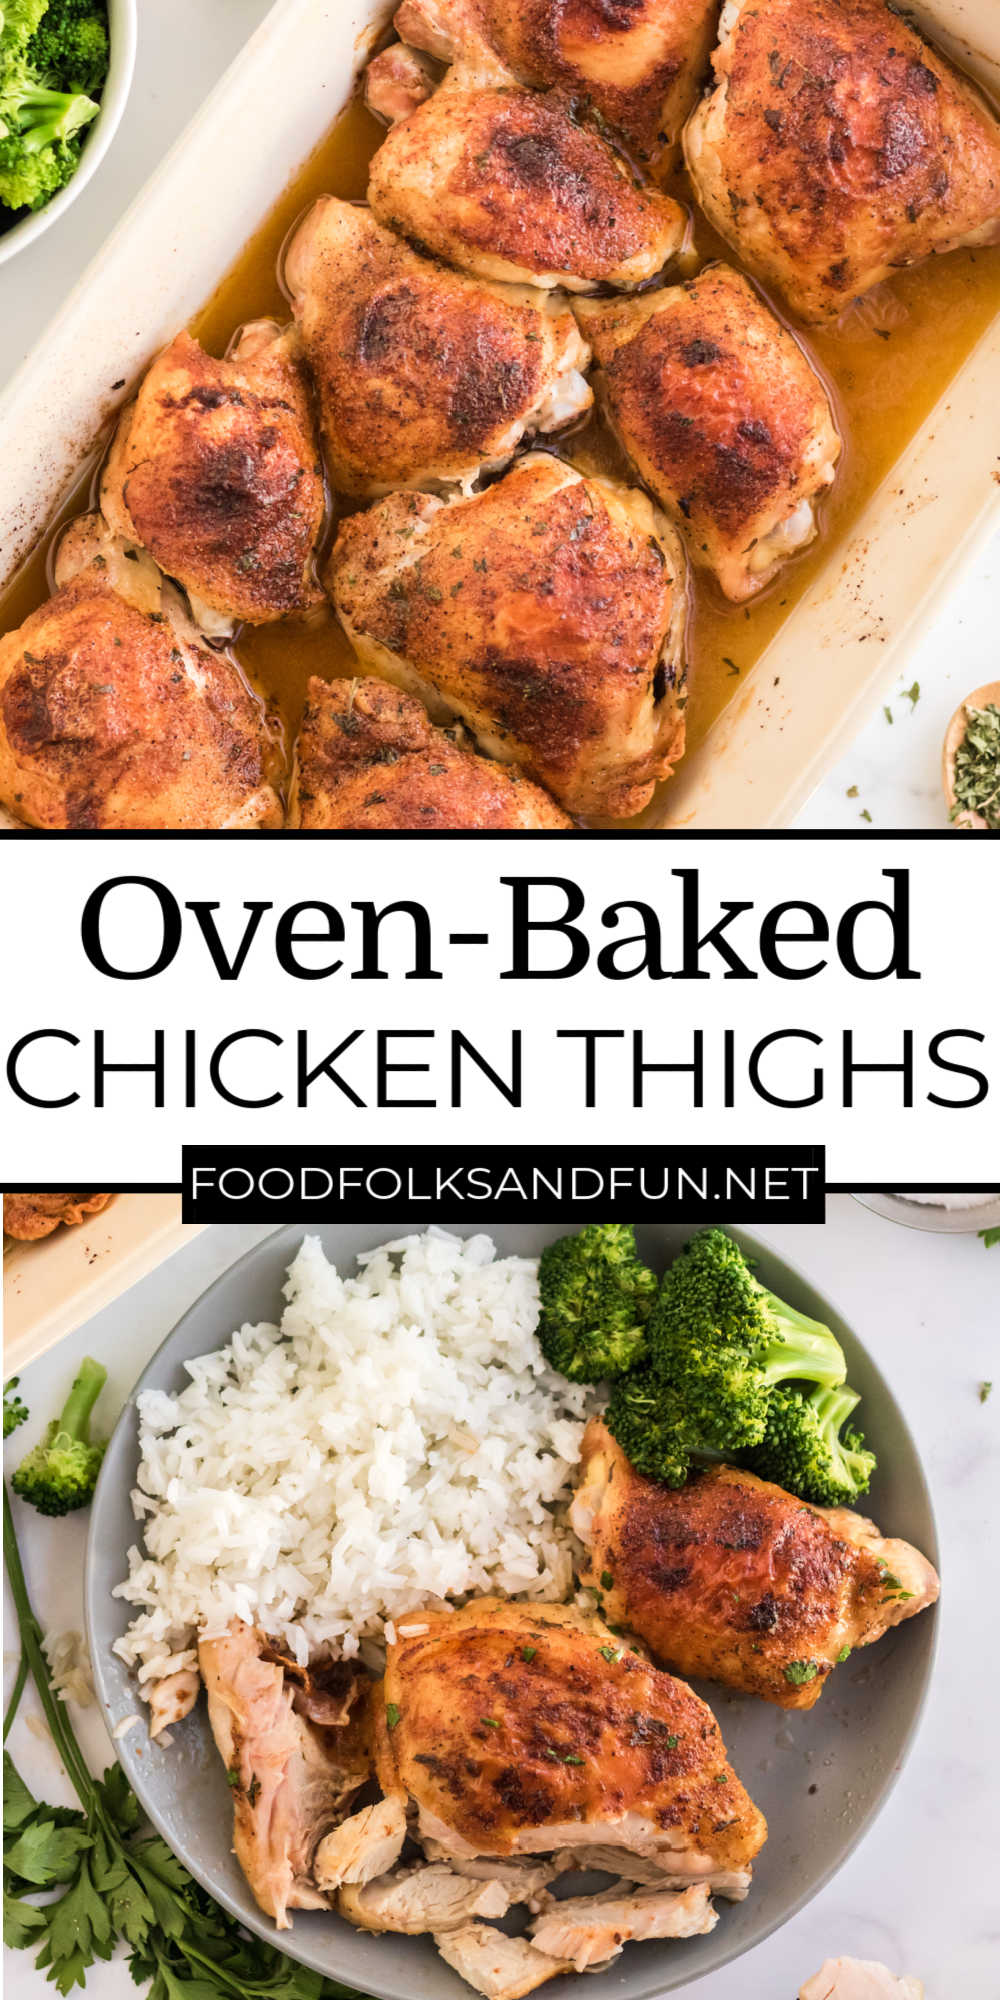 This Oven Baked Chicken Thighs recipe is ready to eat in just 35 minutes. When chicken thighs are roasted in the oven, they are so juicy with deliciously crispy skin. via @foodfolksandfun